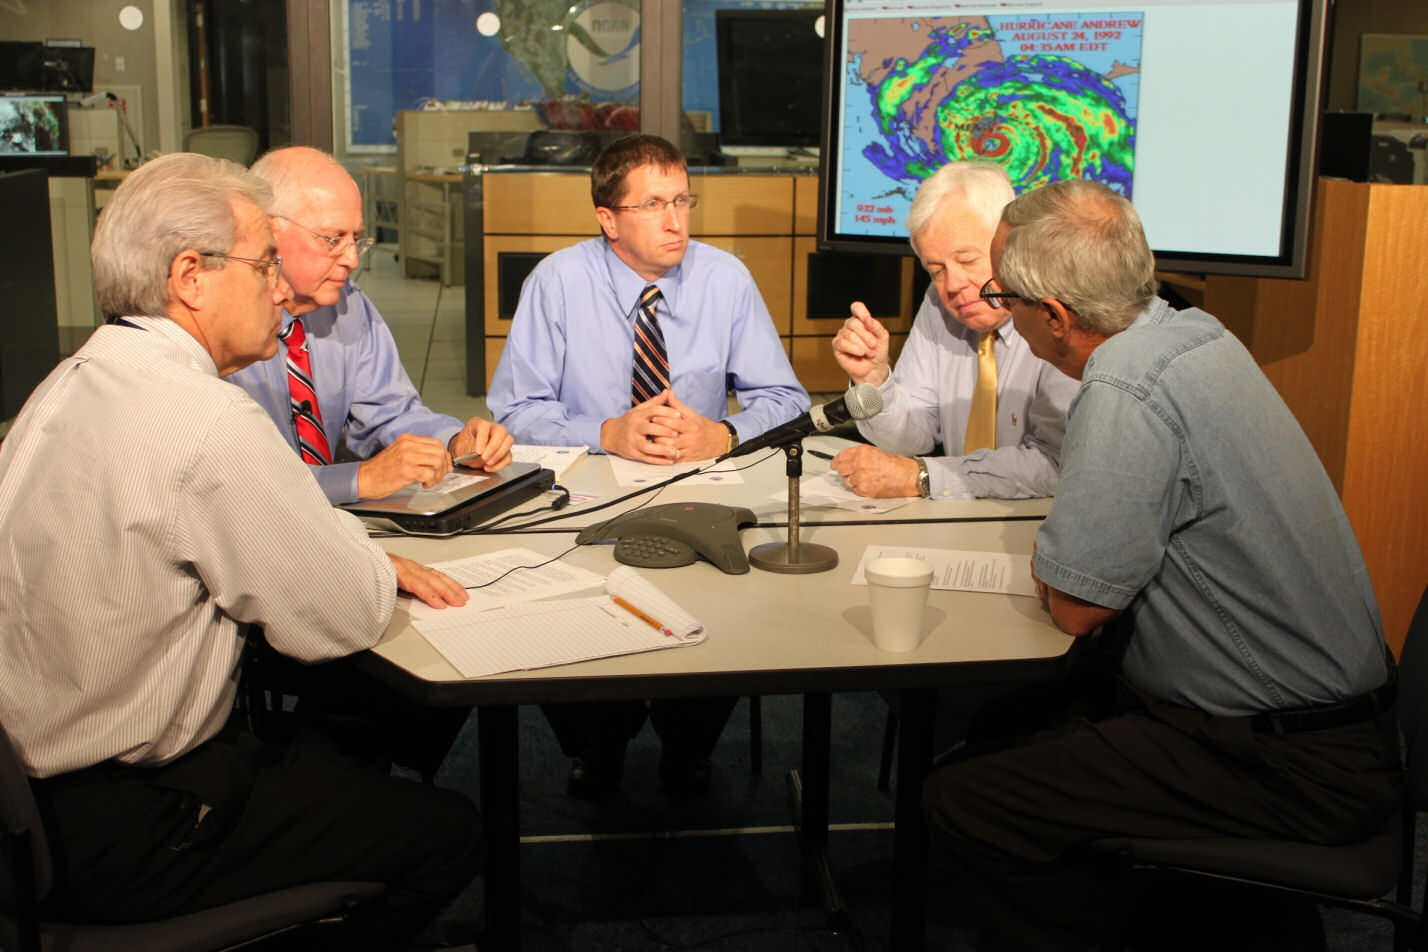 Left to right: Dennis Feltgen, Max Mayfield, Dr. Rick Knabb, Director; Dr. Hugh Willoughby, and Dr. Frank Marks, during the media teleconference.